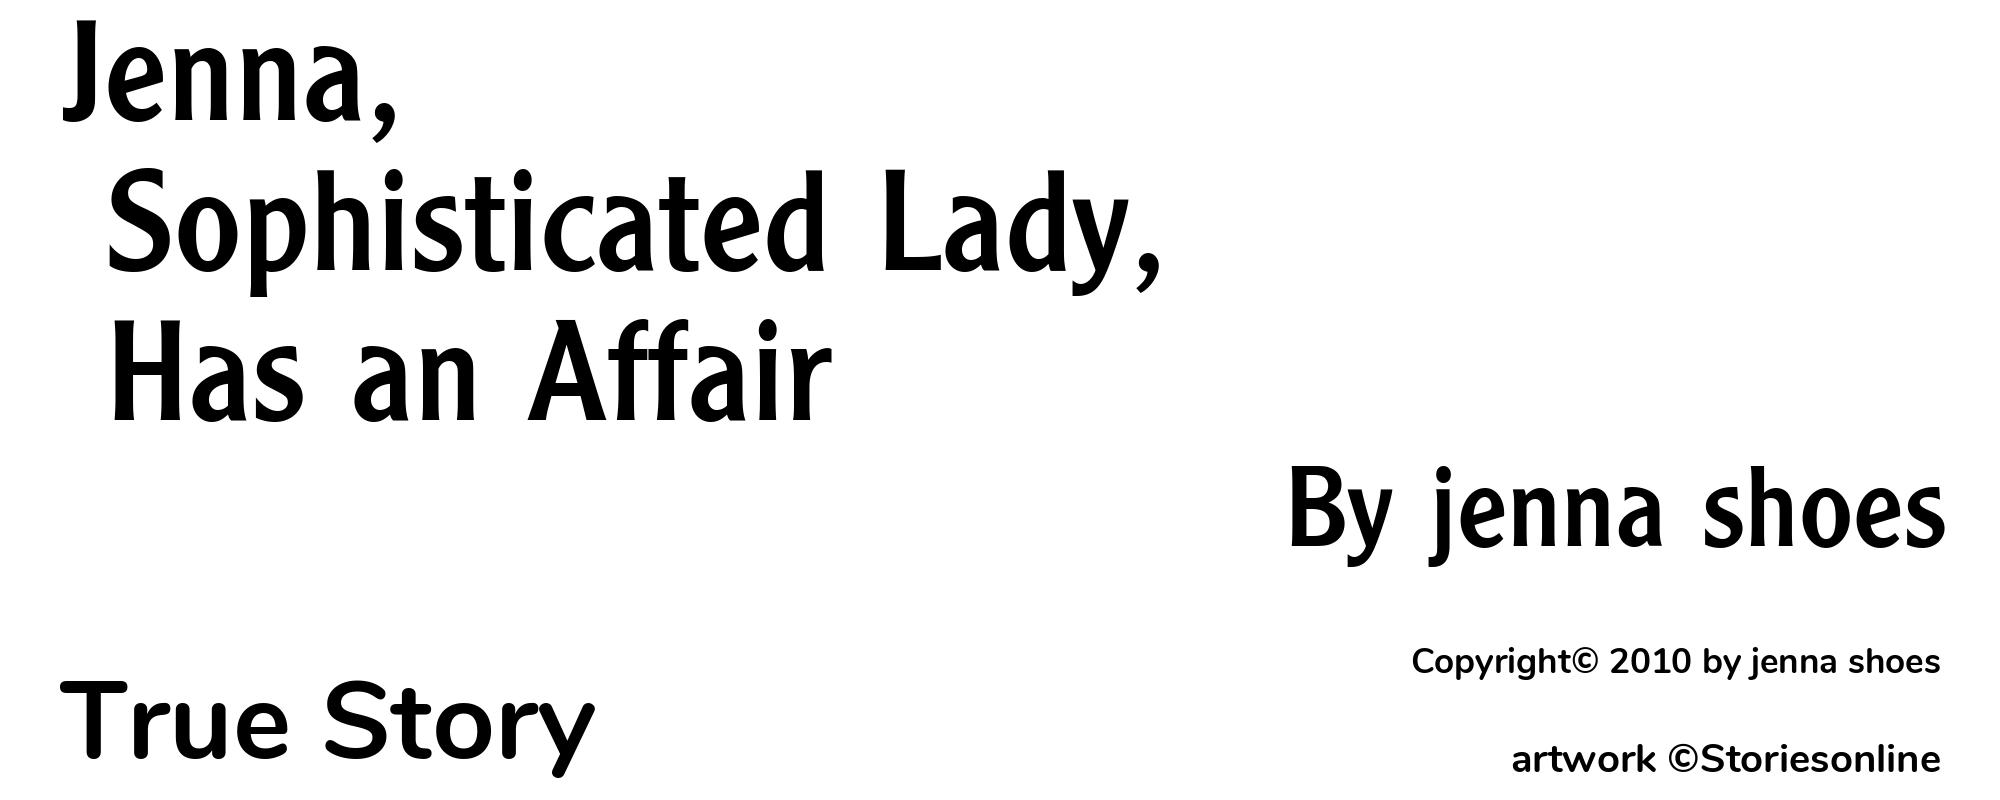 Jenna, Sophisticated Lady, Has an Affair - Cover